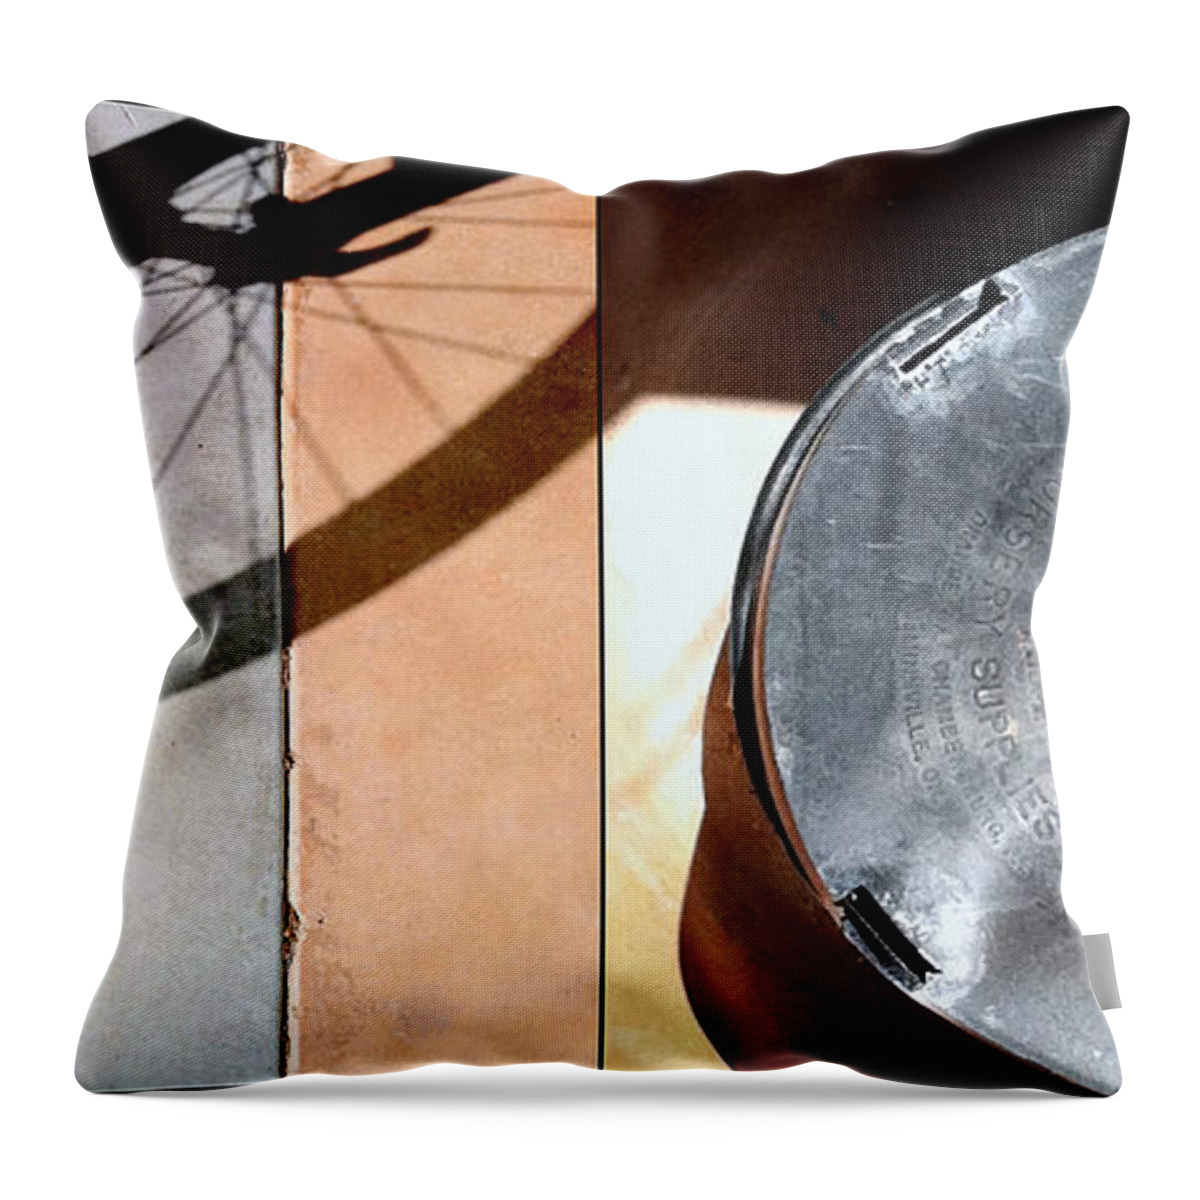 Shadows Throw Pillow featuring the photograph SHAD O's by Marlene Burns